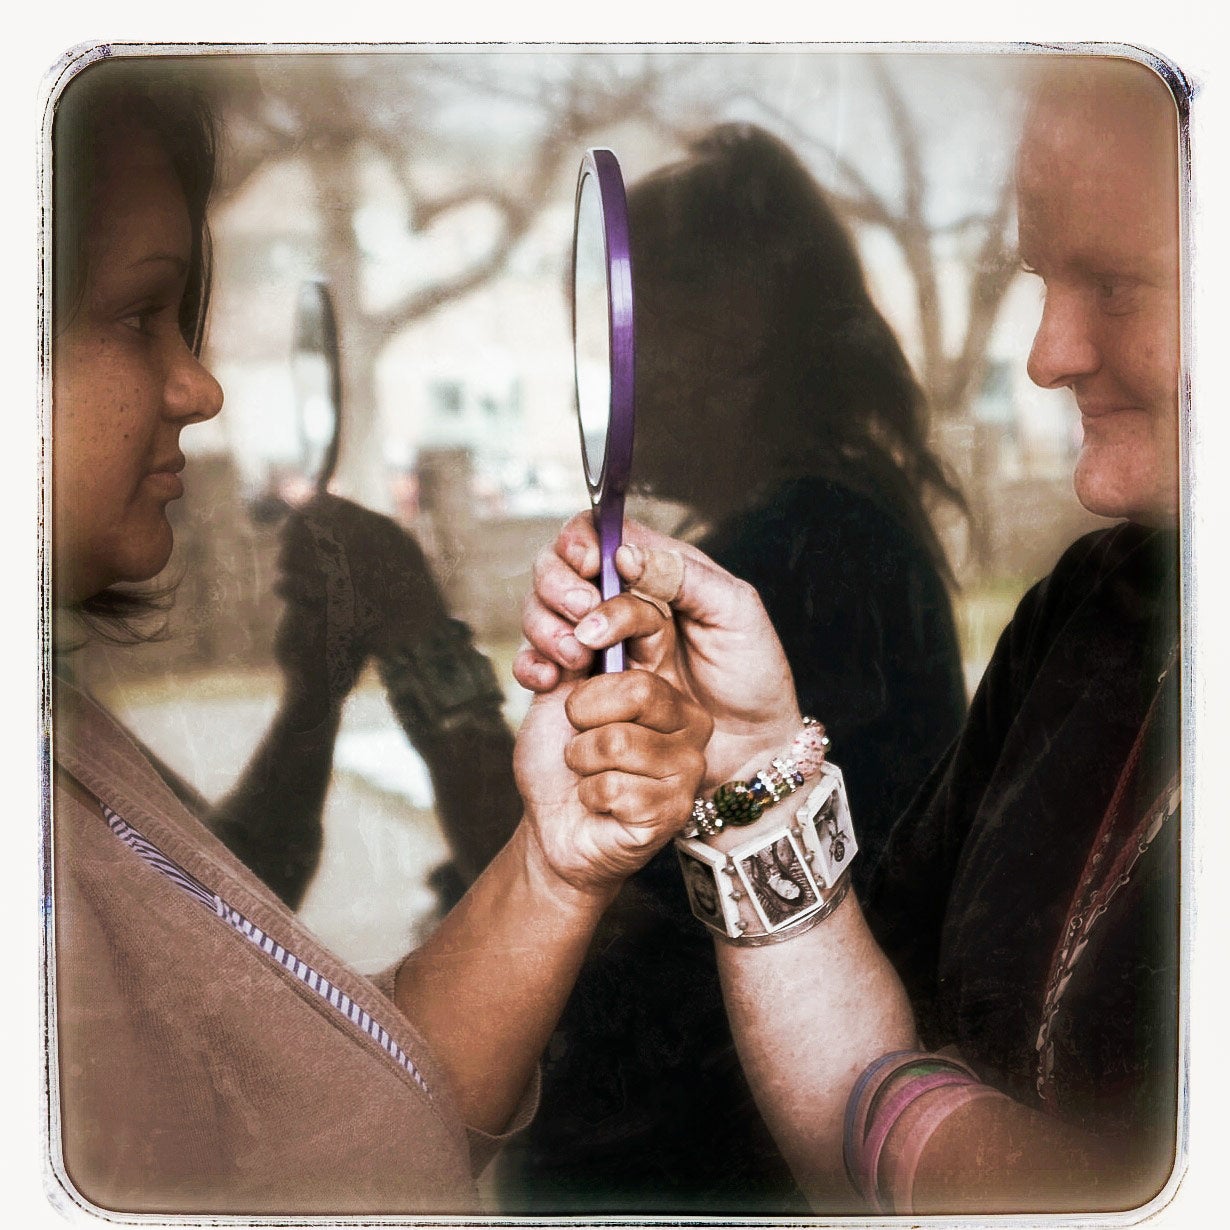 Two women hold a handheld mirror. This image appears in the book EXPOSURE: Homelessness through the lens of art & poetry.